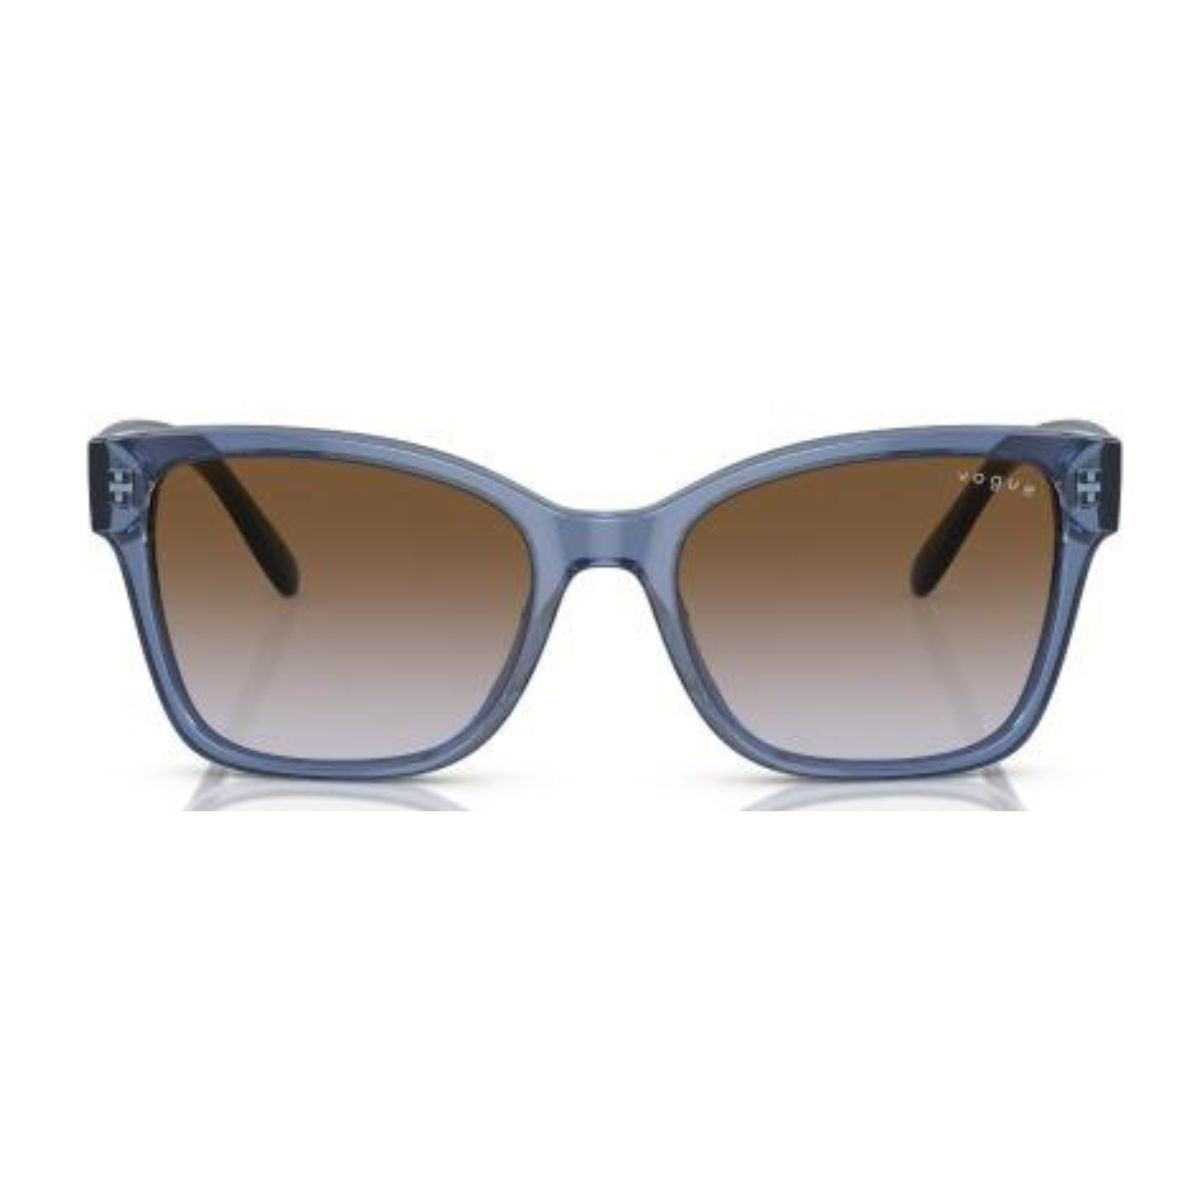 "Buy Stylish Blue Colour Cat Eye Sunglasses For Womens At Optorium"